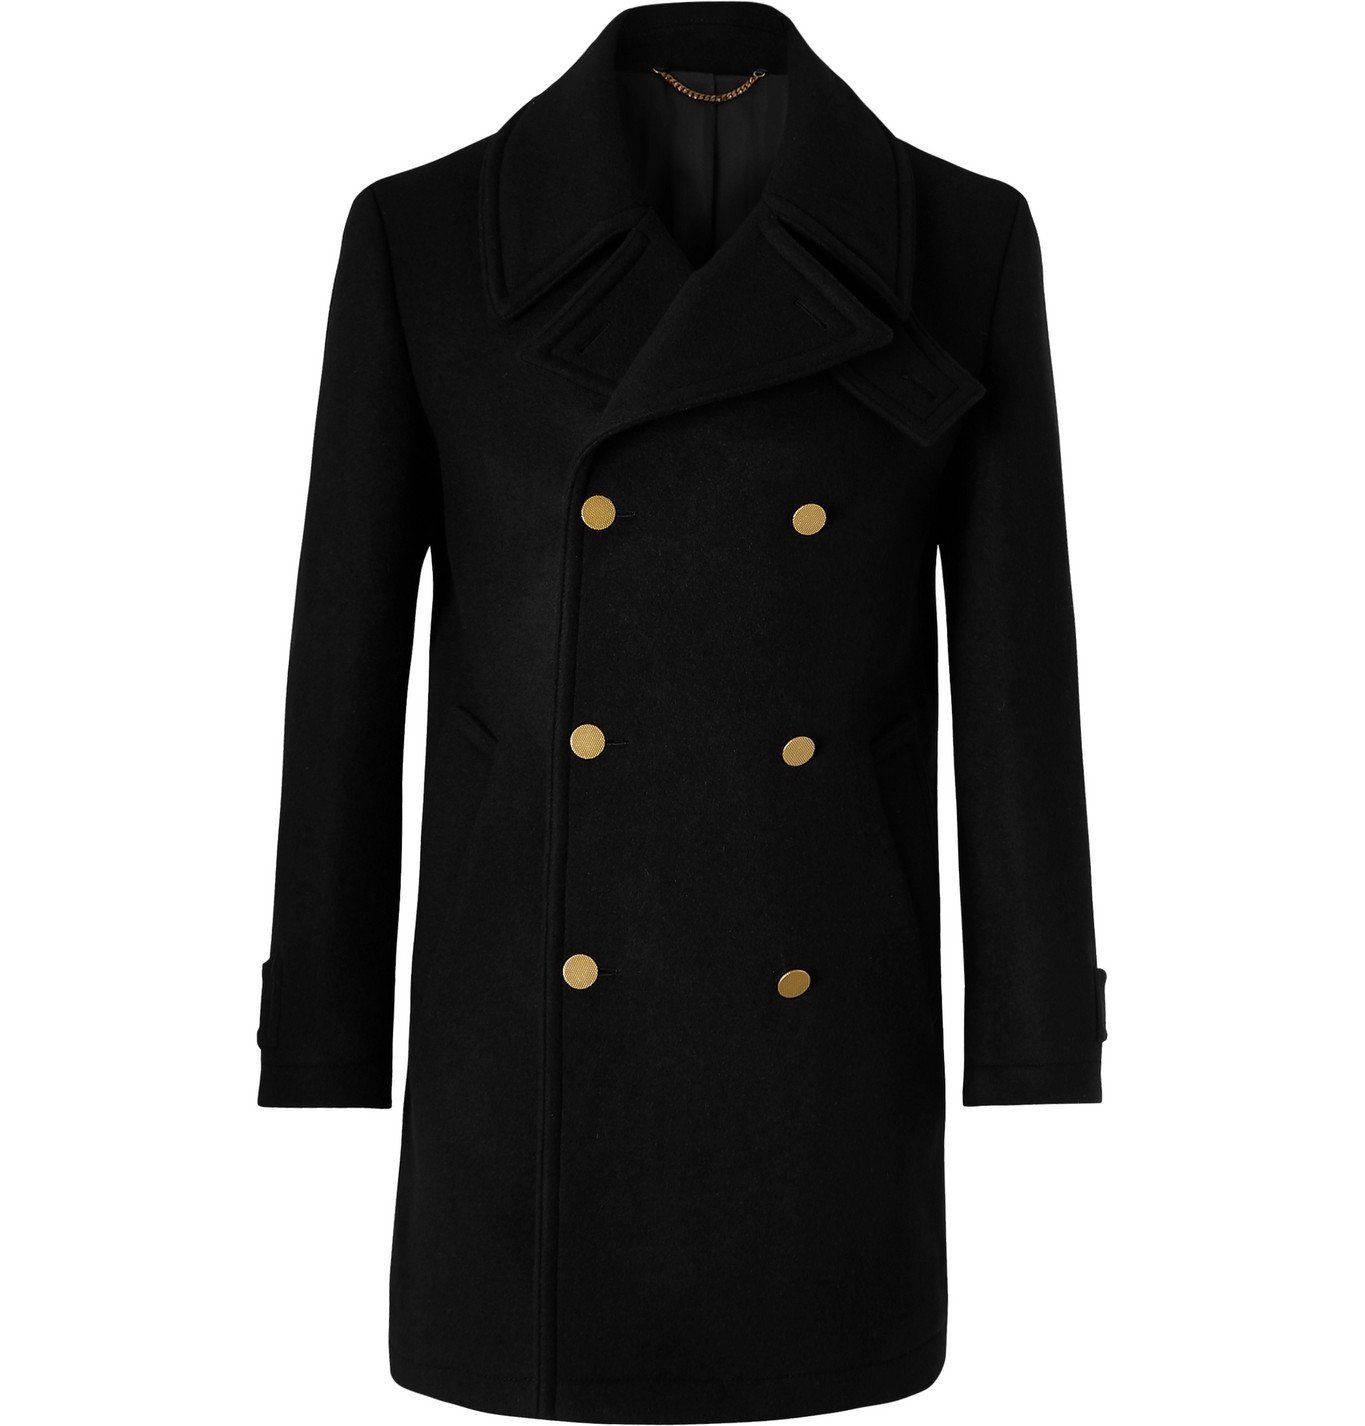 DUNHILL - Double-Breasted Wool and Cashmere-Blend Peacoat - Black Dunhill